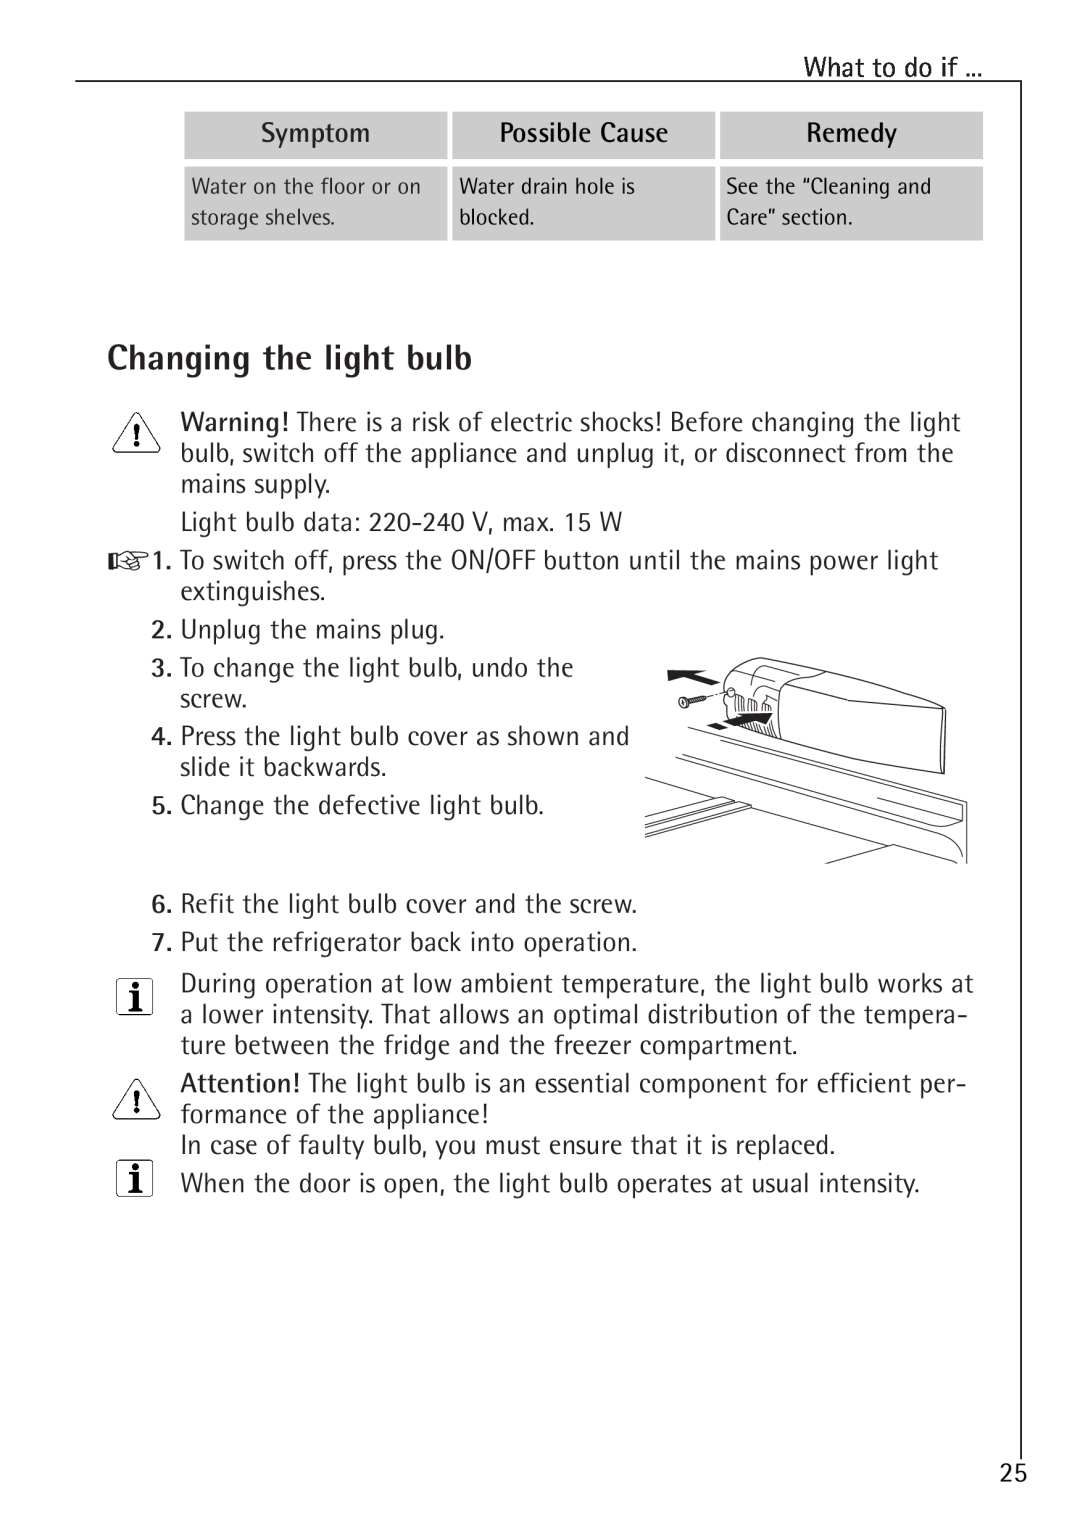 Electrolux 1583-8 TK Changing the light bulb, Symptom, Possible Cause, Remedy, Water on the floor or on, storage shelves 